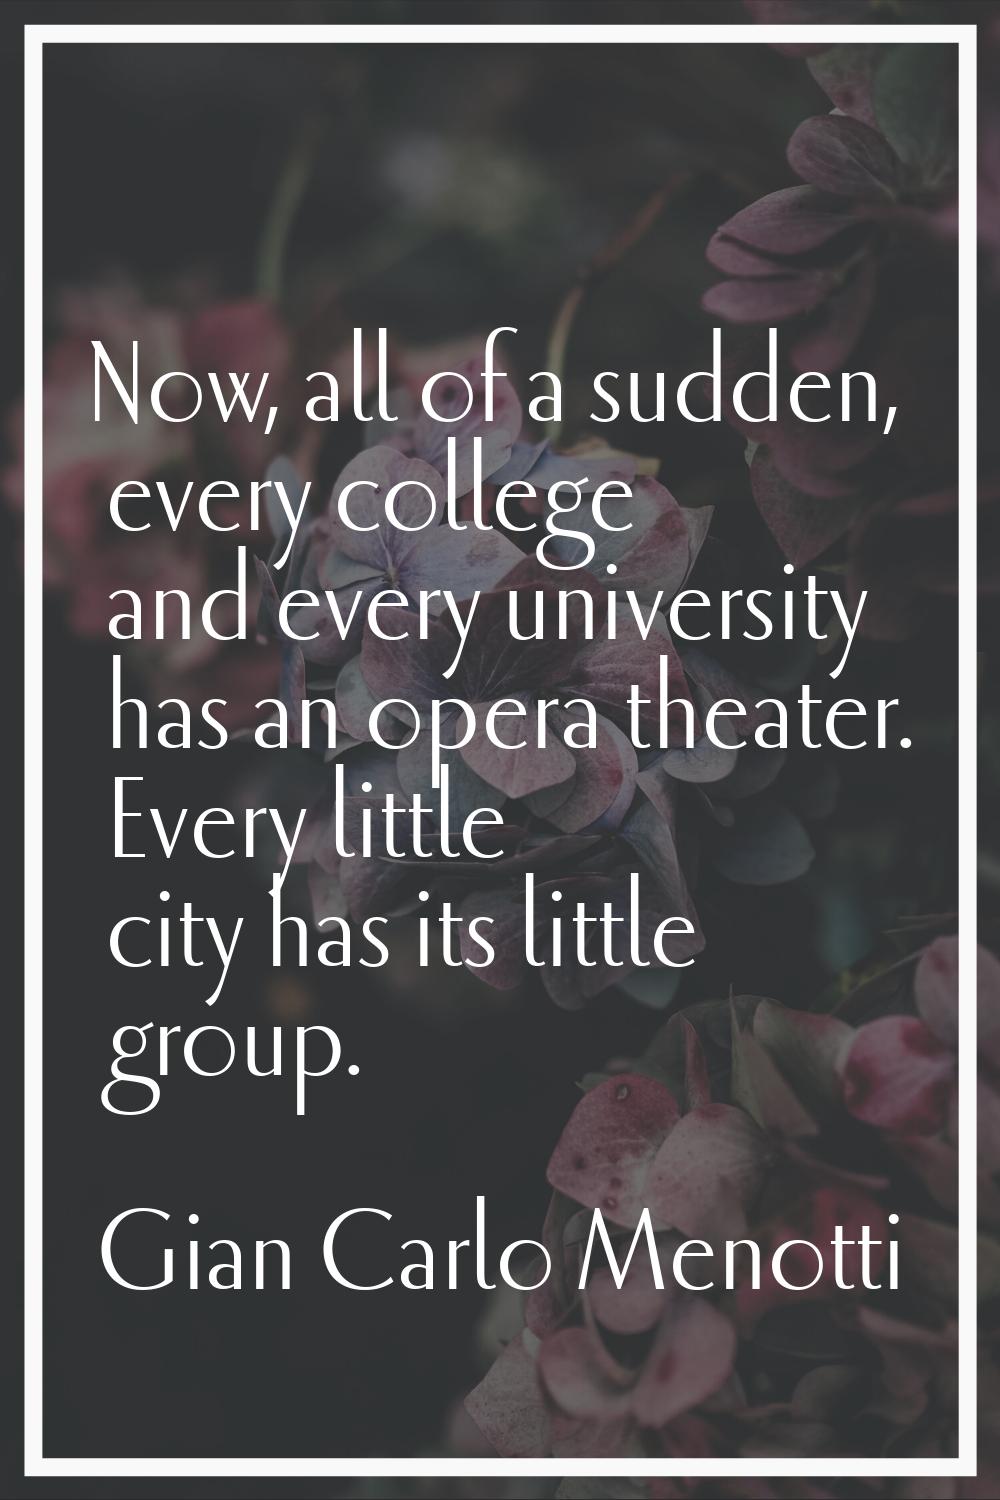 Now, all of a sudden, every college and every university has an opera theater. Every little city ha